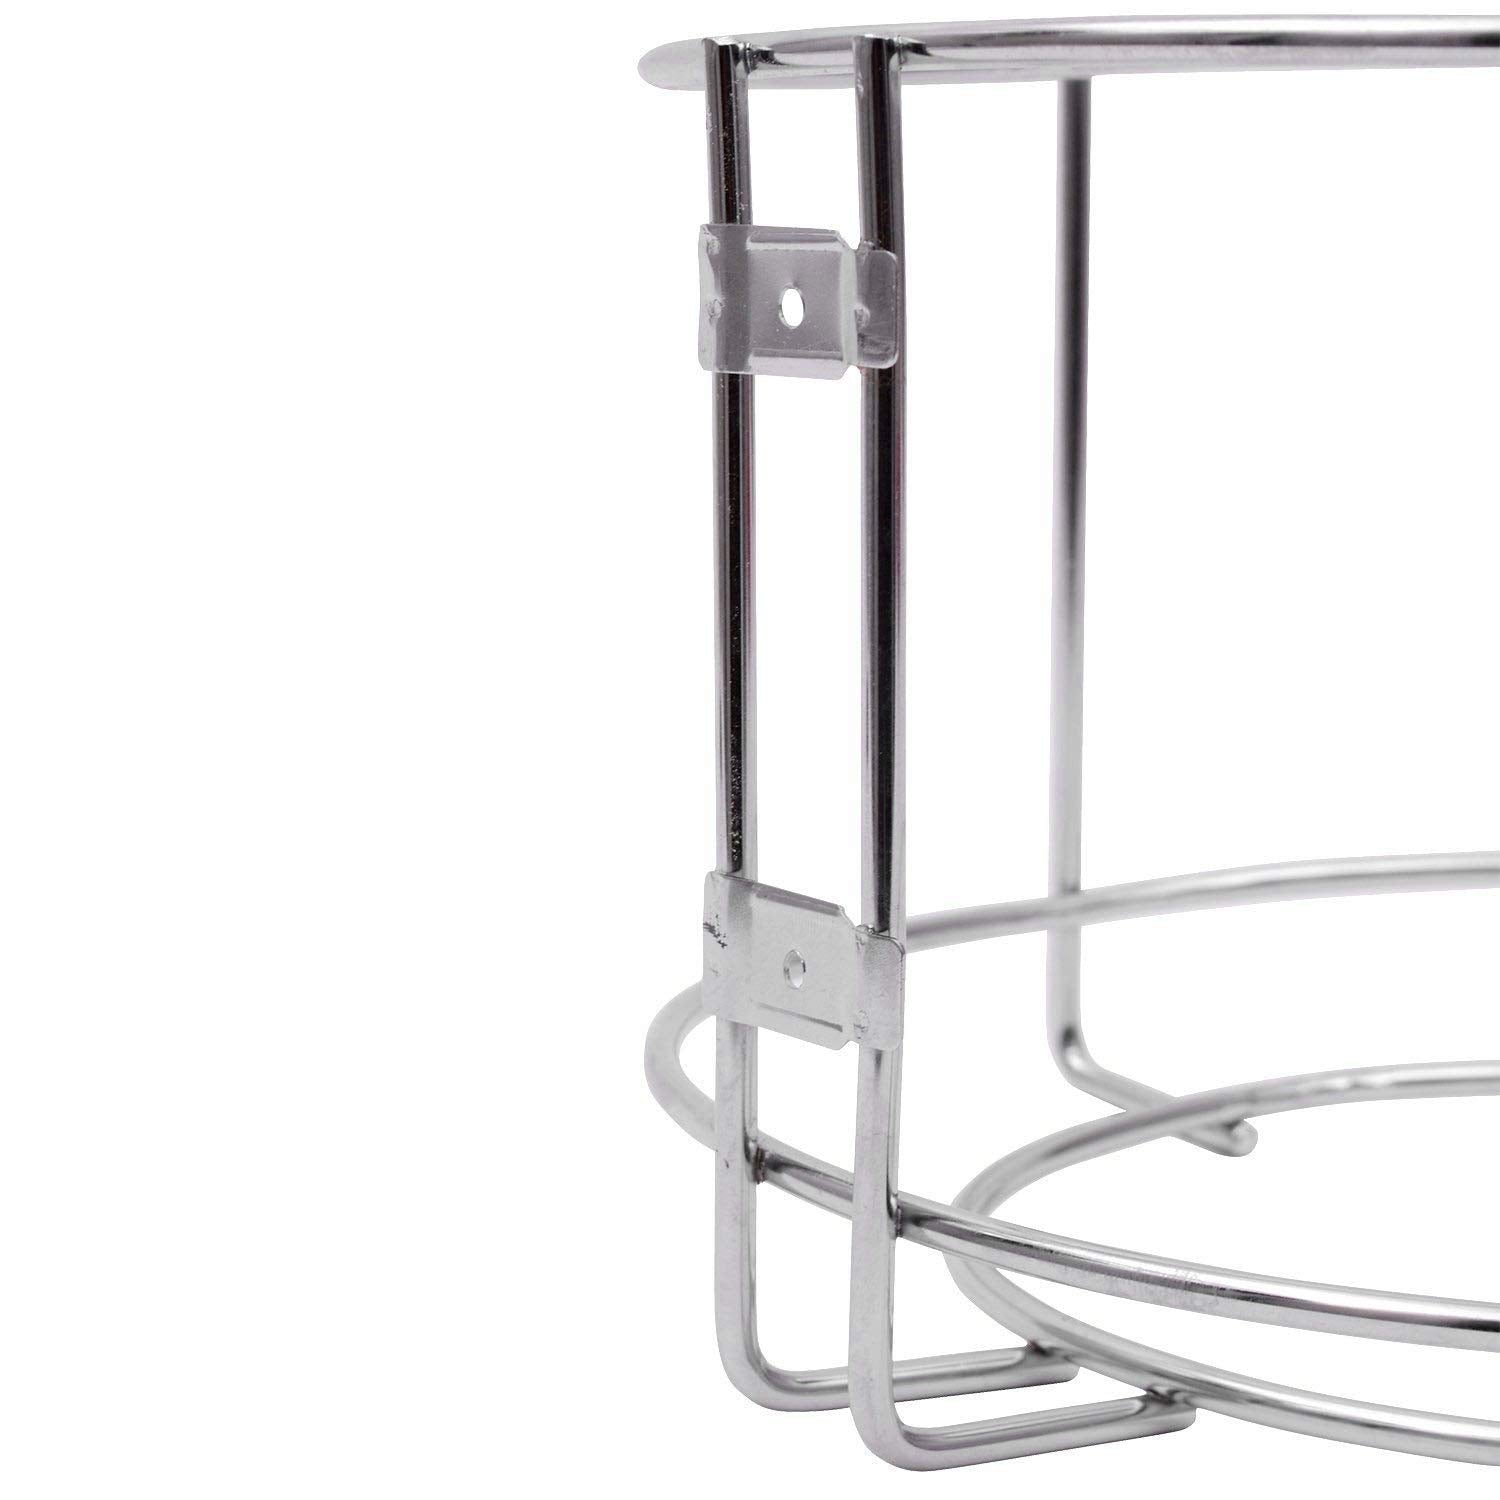 2791 Stainless steel Dustbin Stand For Holding Dustbin Easily Without Any Problem. DeoDap